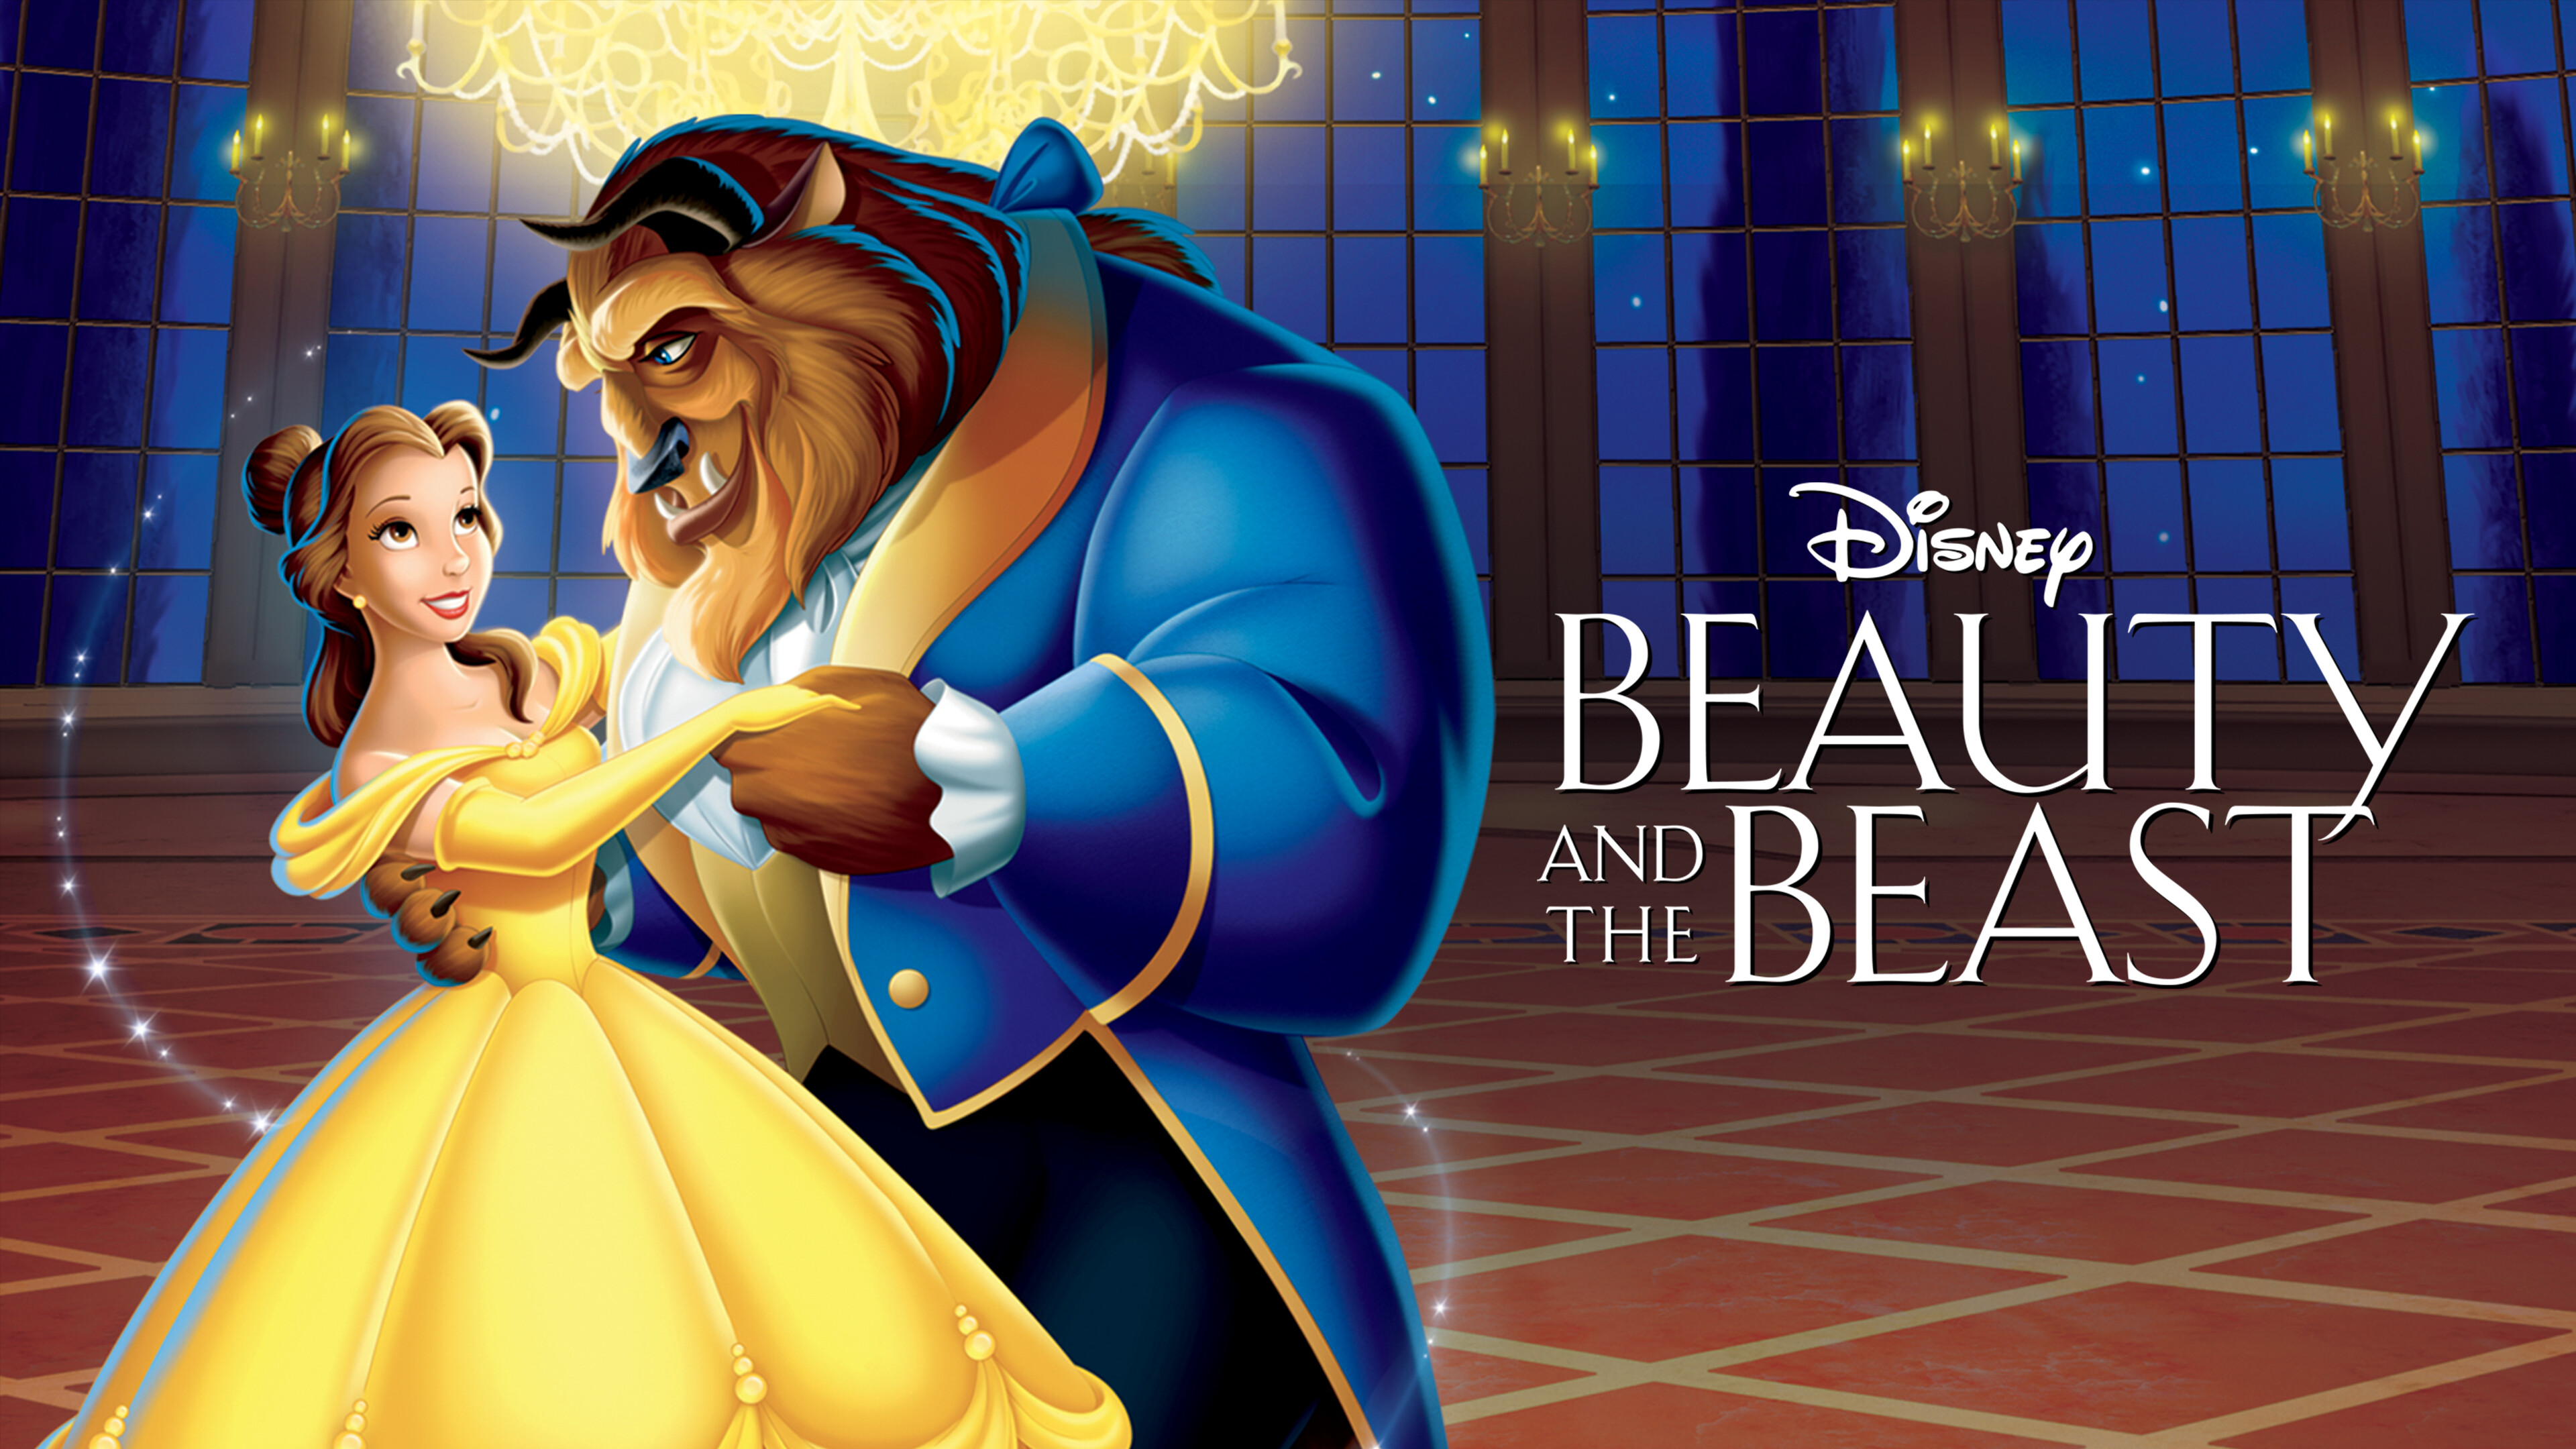 Beauty and the Beast: A 1991 American animated musical romantic fantasy film produced by Walt Disney Feature Animation. 3840x2160 4K Wallpaper.